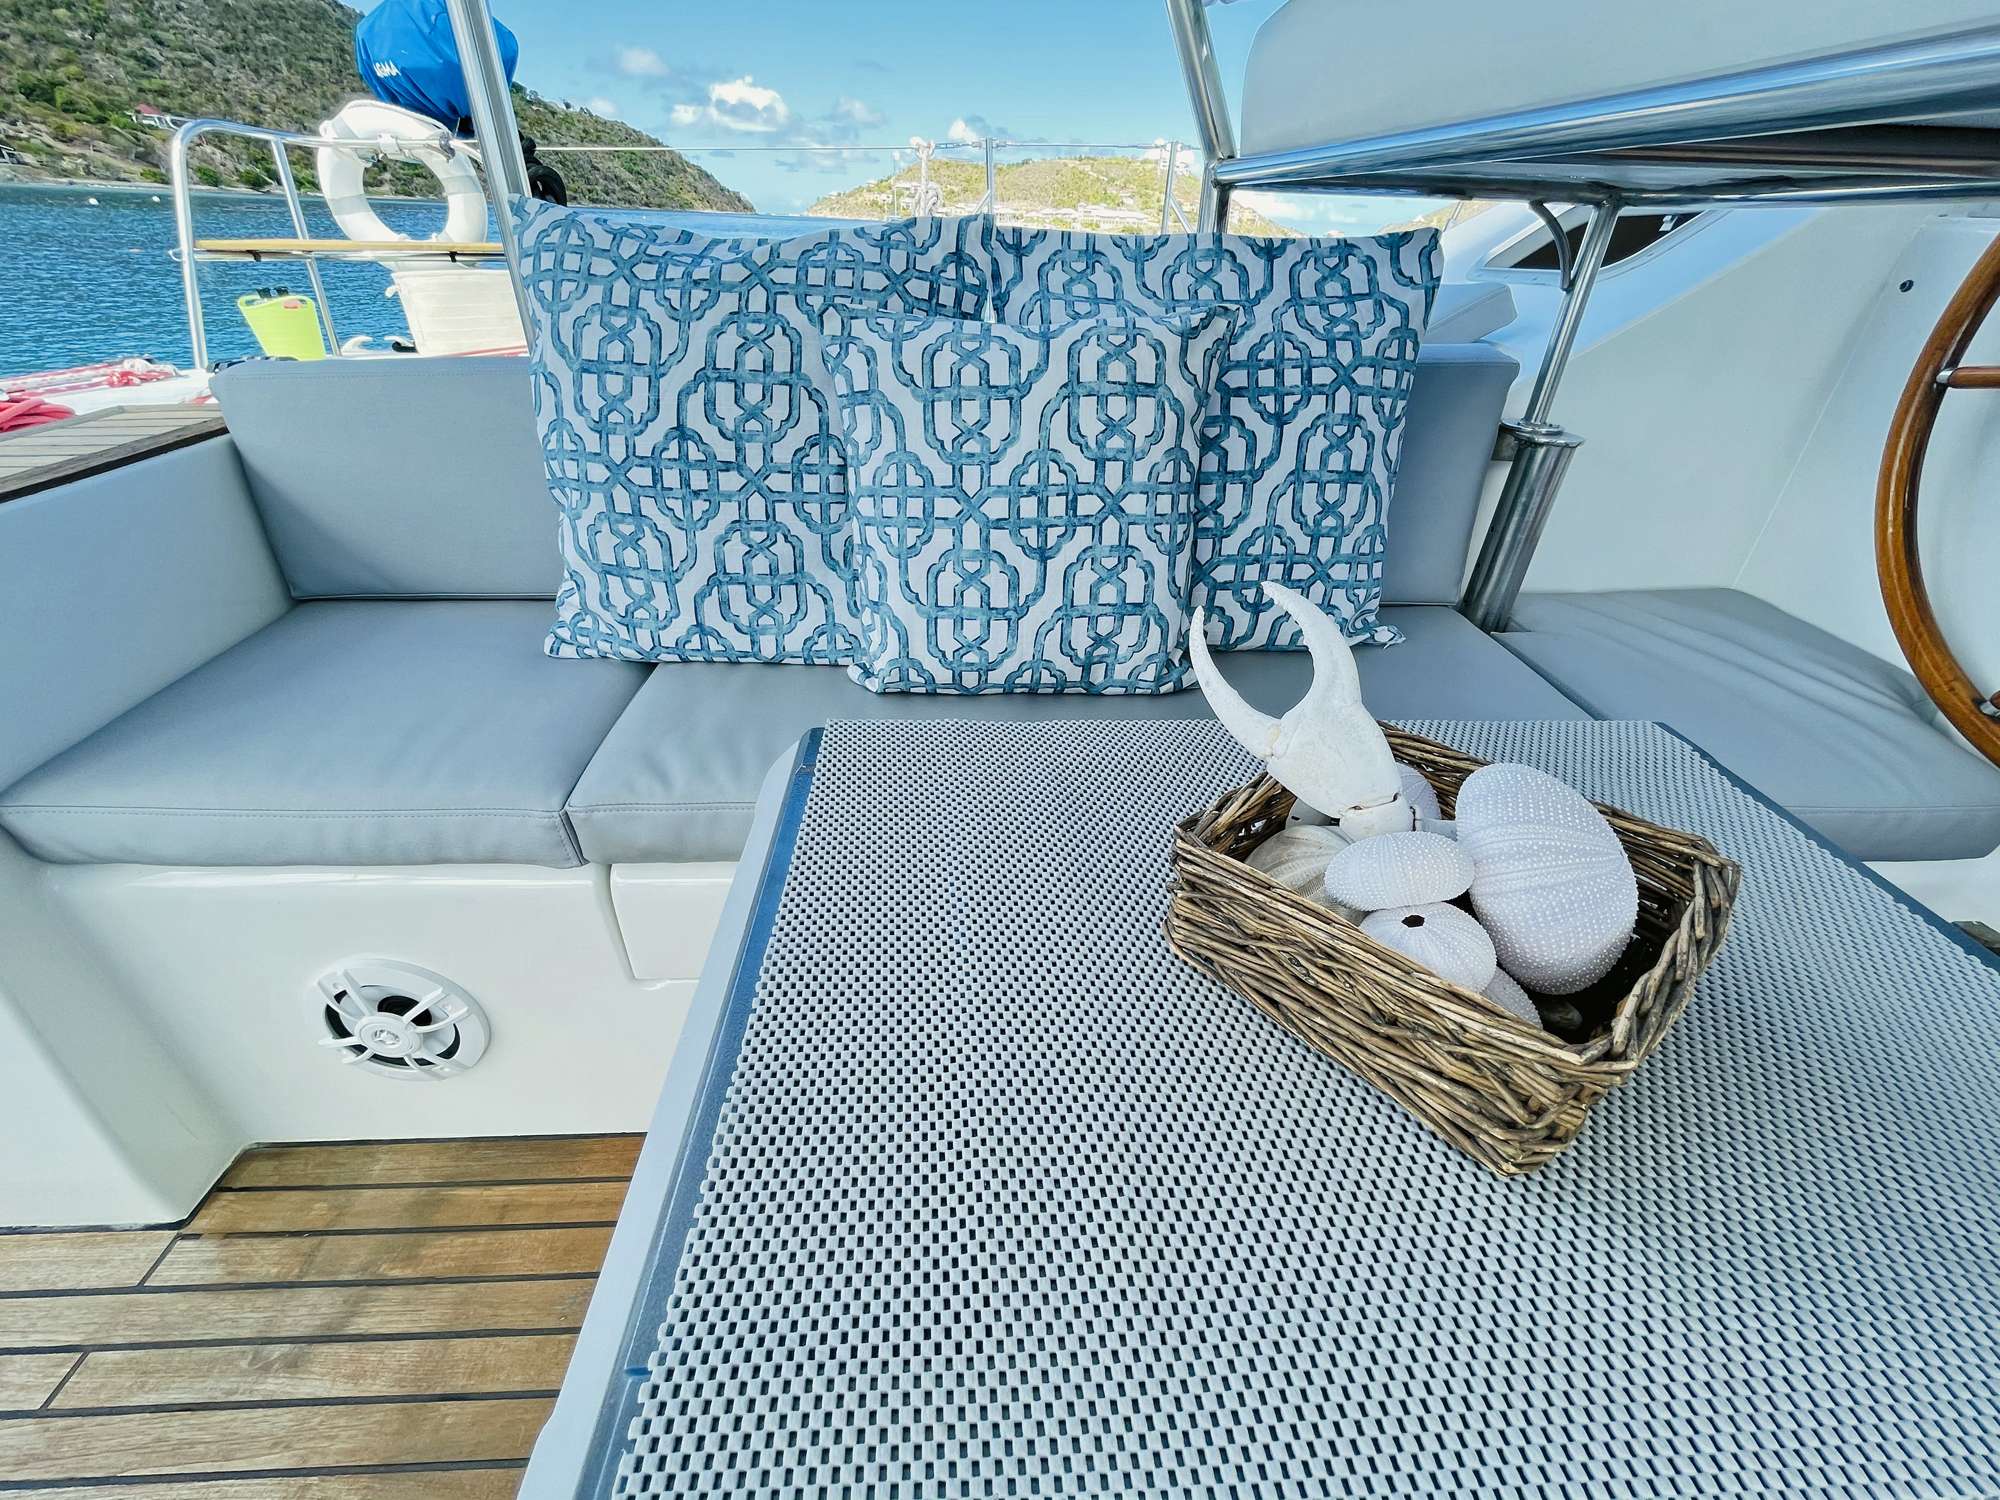 VISION Yacht Charter - Attention to Details, for your enjoyment!